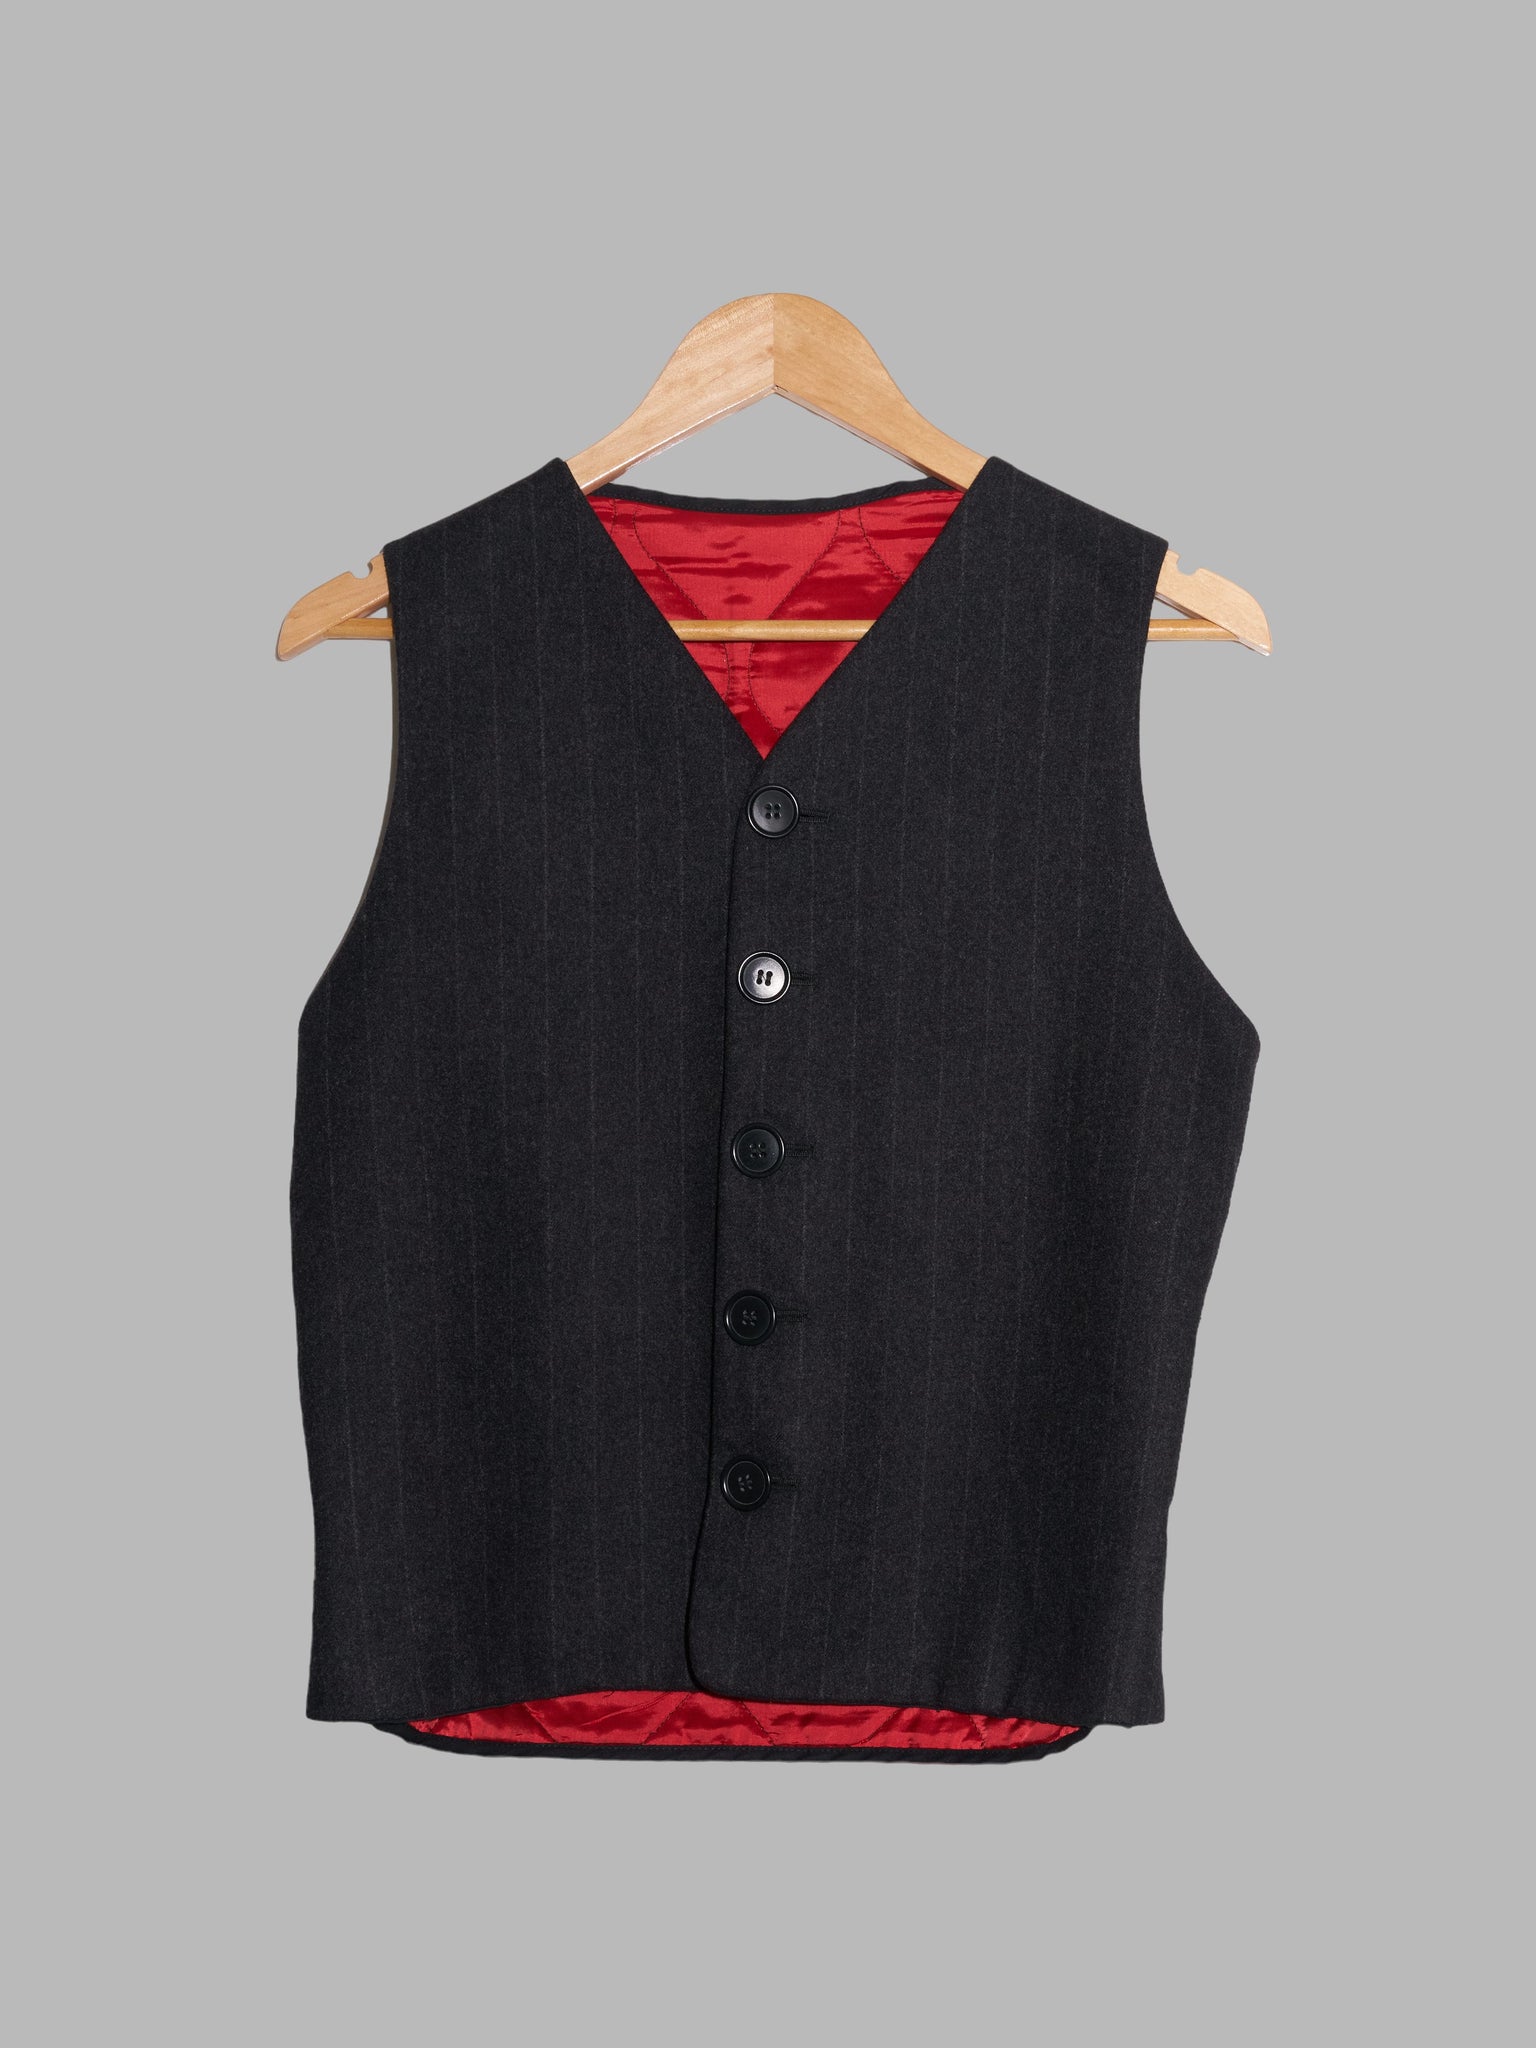 Dirk Bikkembergs 1990s quilted striped wool waistcoat with red reversible back